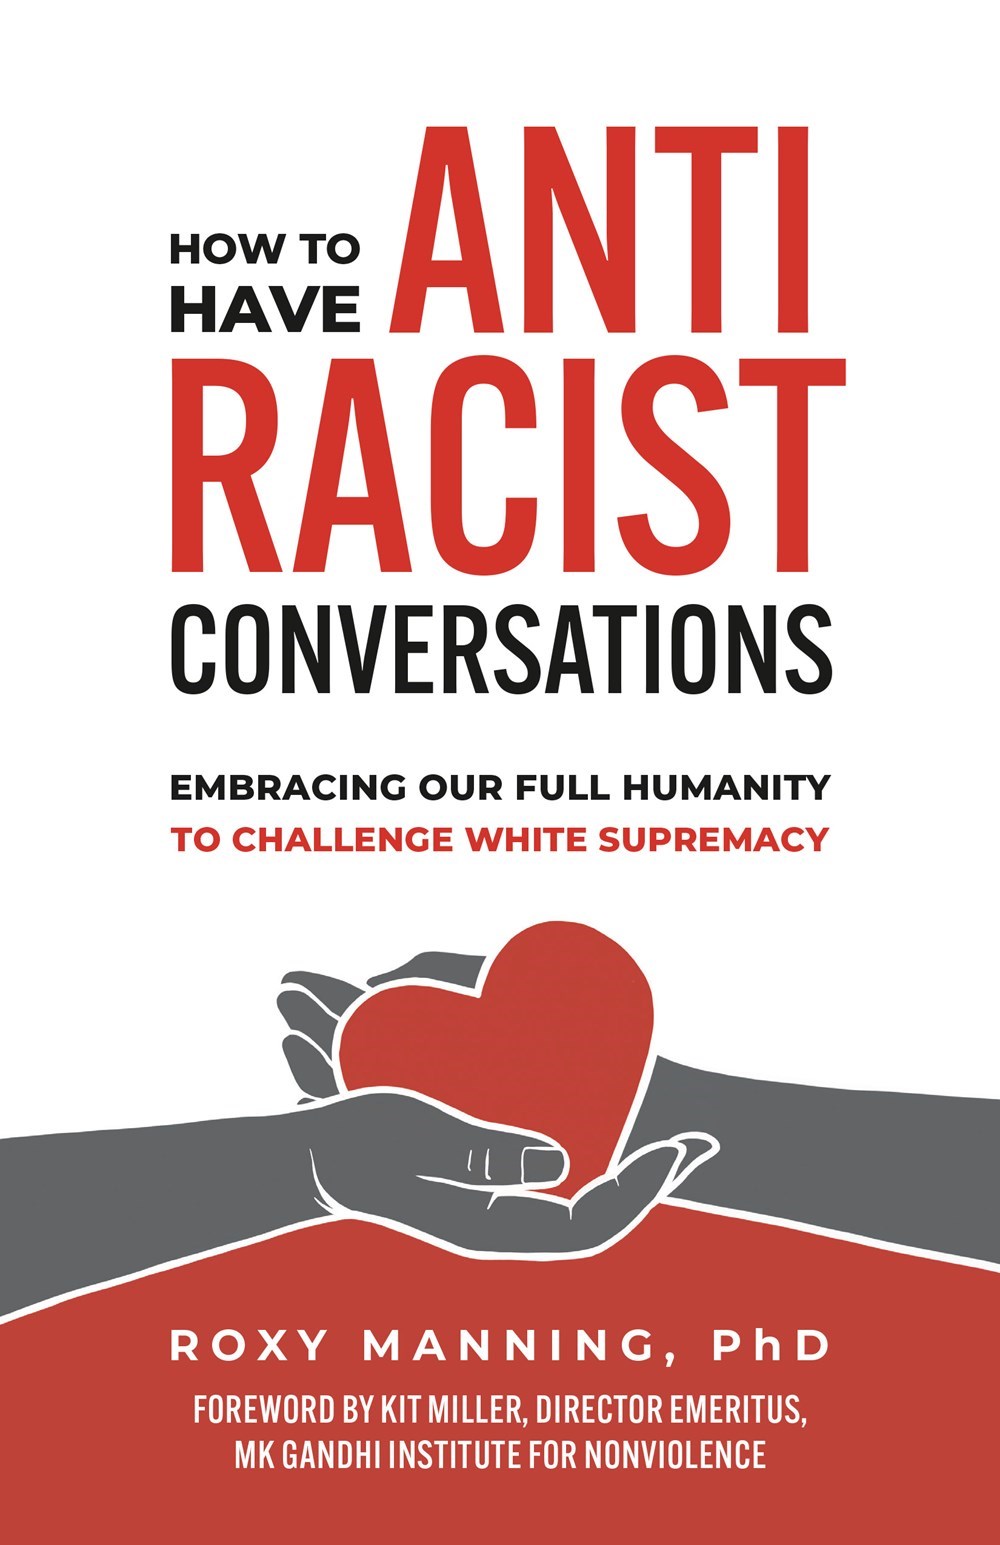  How to Have Antiracist Conversations: Embracing Our Full Humanity to Challenge White Supremacy